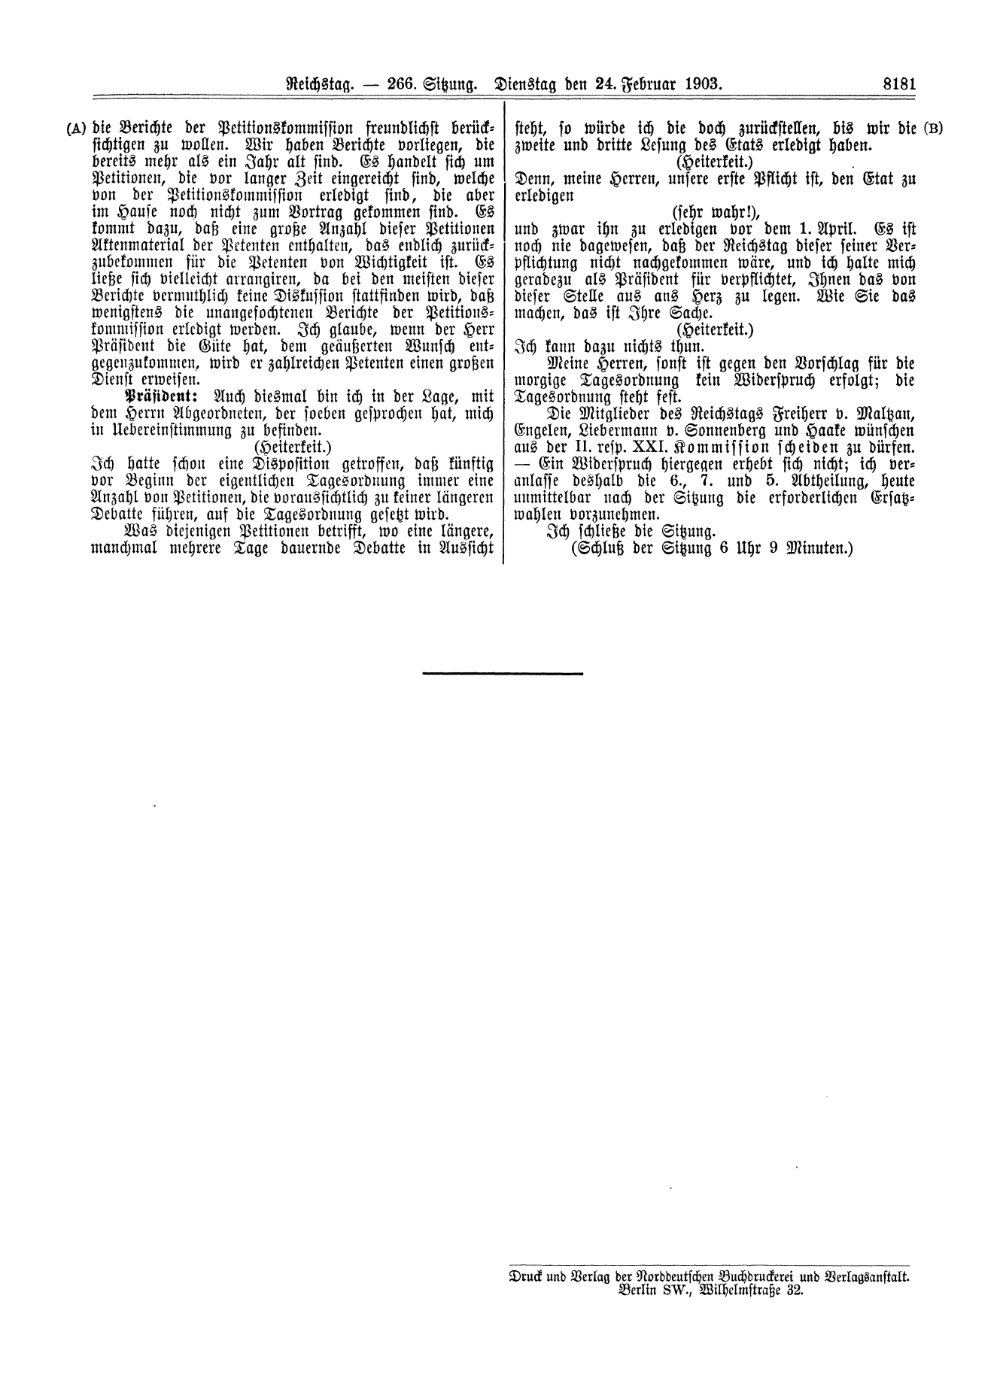 Scan of page 8181